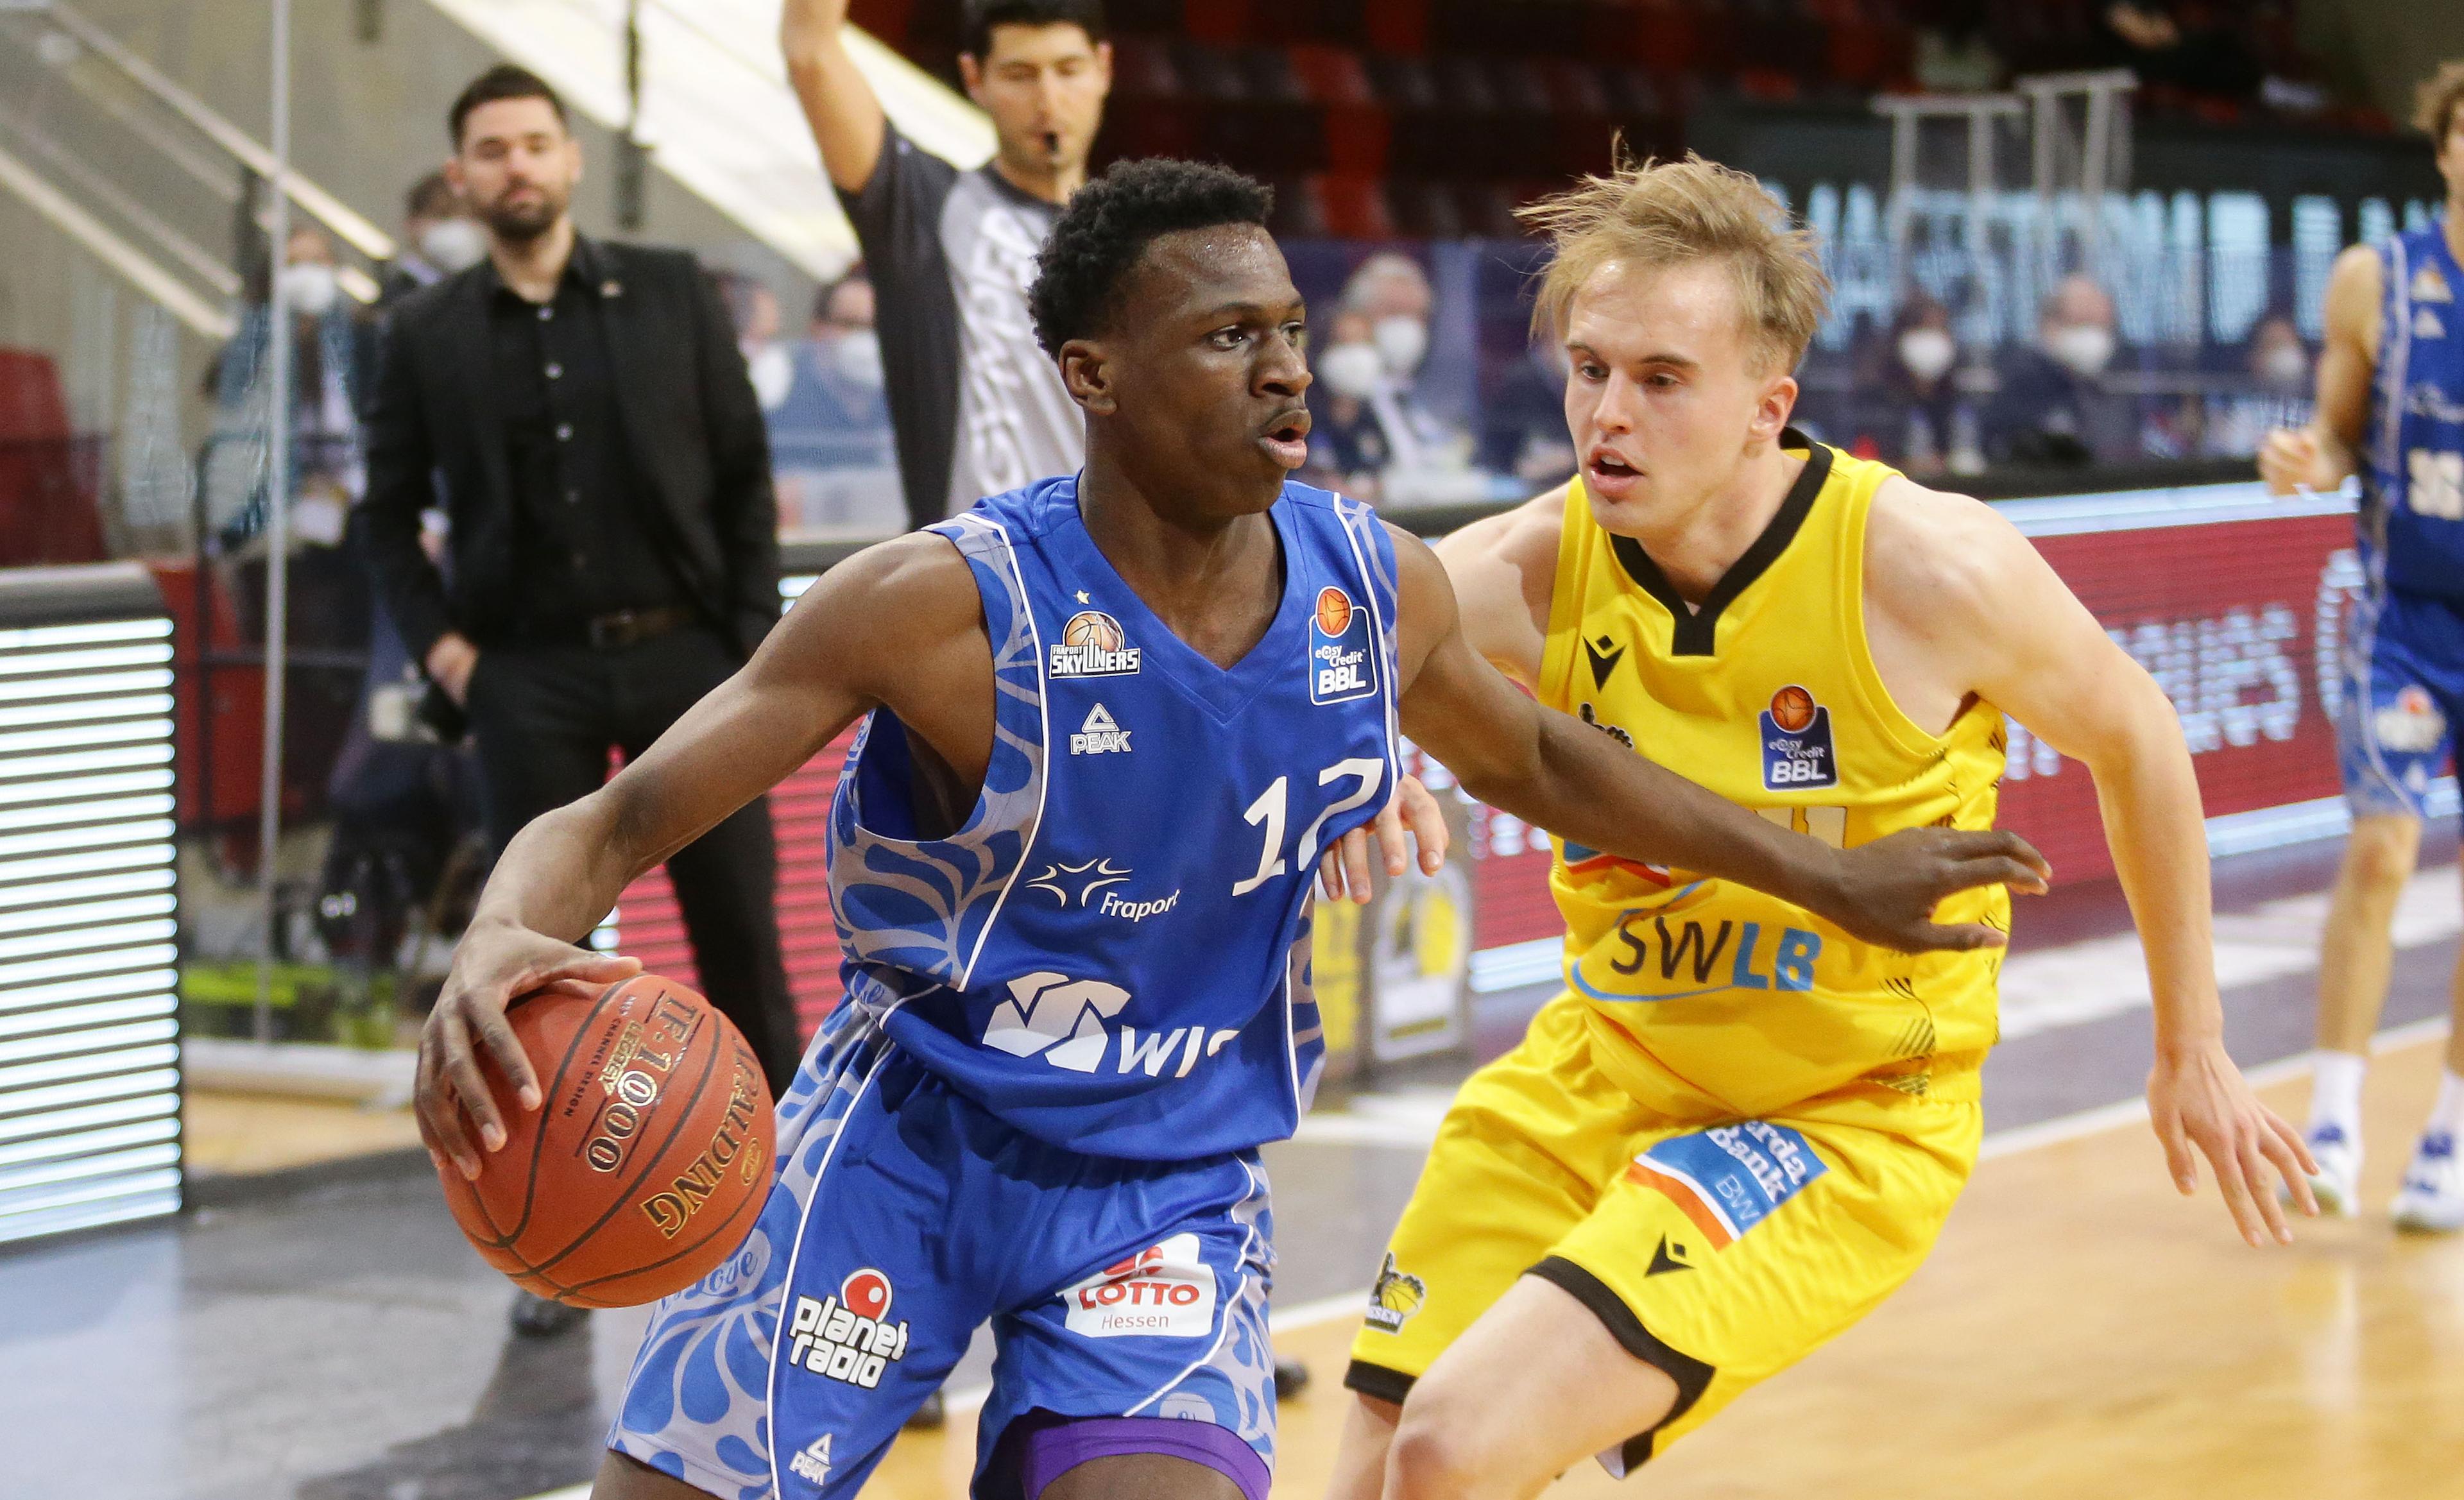 This week was full of major news as RASTA Vechta was the first team that will be relegated to the ProA after the season and MHP RIESEN Ludwigsburg locked up home court advantage throughout the playoffs. There was also Joshua Bonga becoming the second youngest scorer in the easyCredit BBL since the start of data collection in 1998 for FRAPORT SKYLINERS. Elsewhere, JobStairs GIESSEN 46ers won twice to keep the pressure on SYNTAINICS MBC to see which team will join Vechta in relegation. Also, the fight for fifth place in the standings looks like it will go down a tiebreaker.